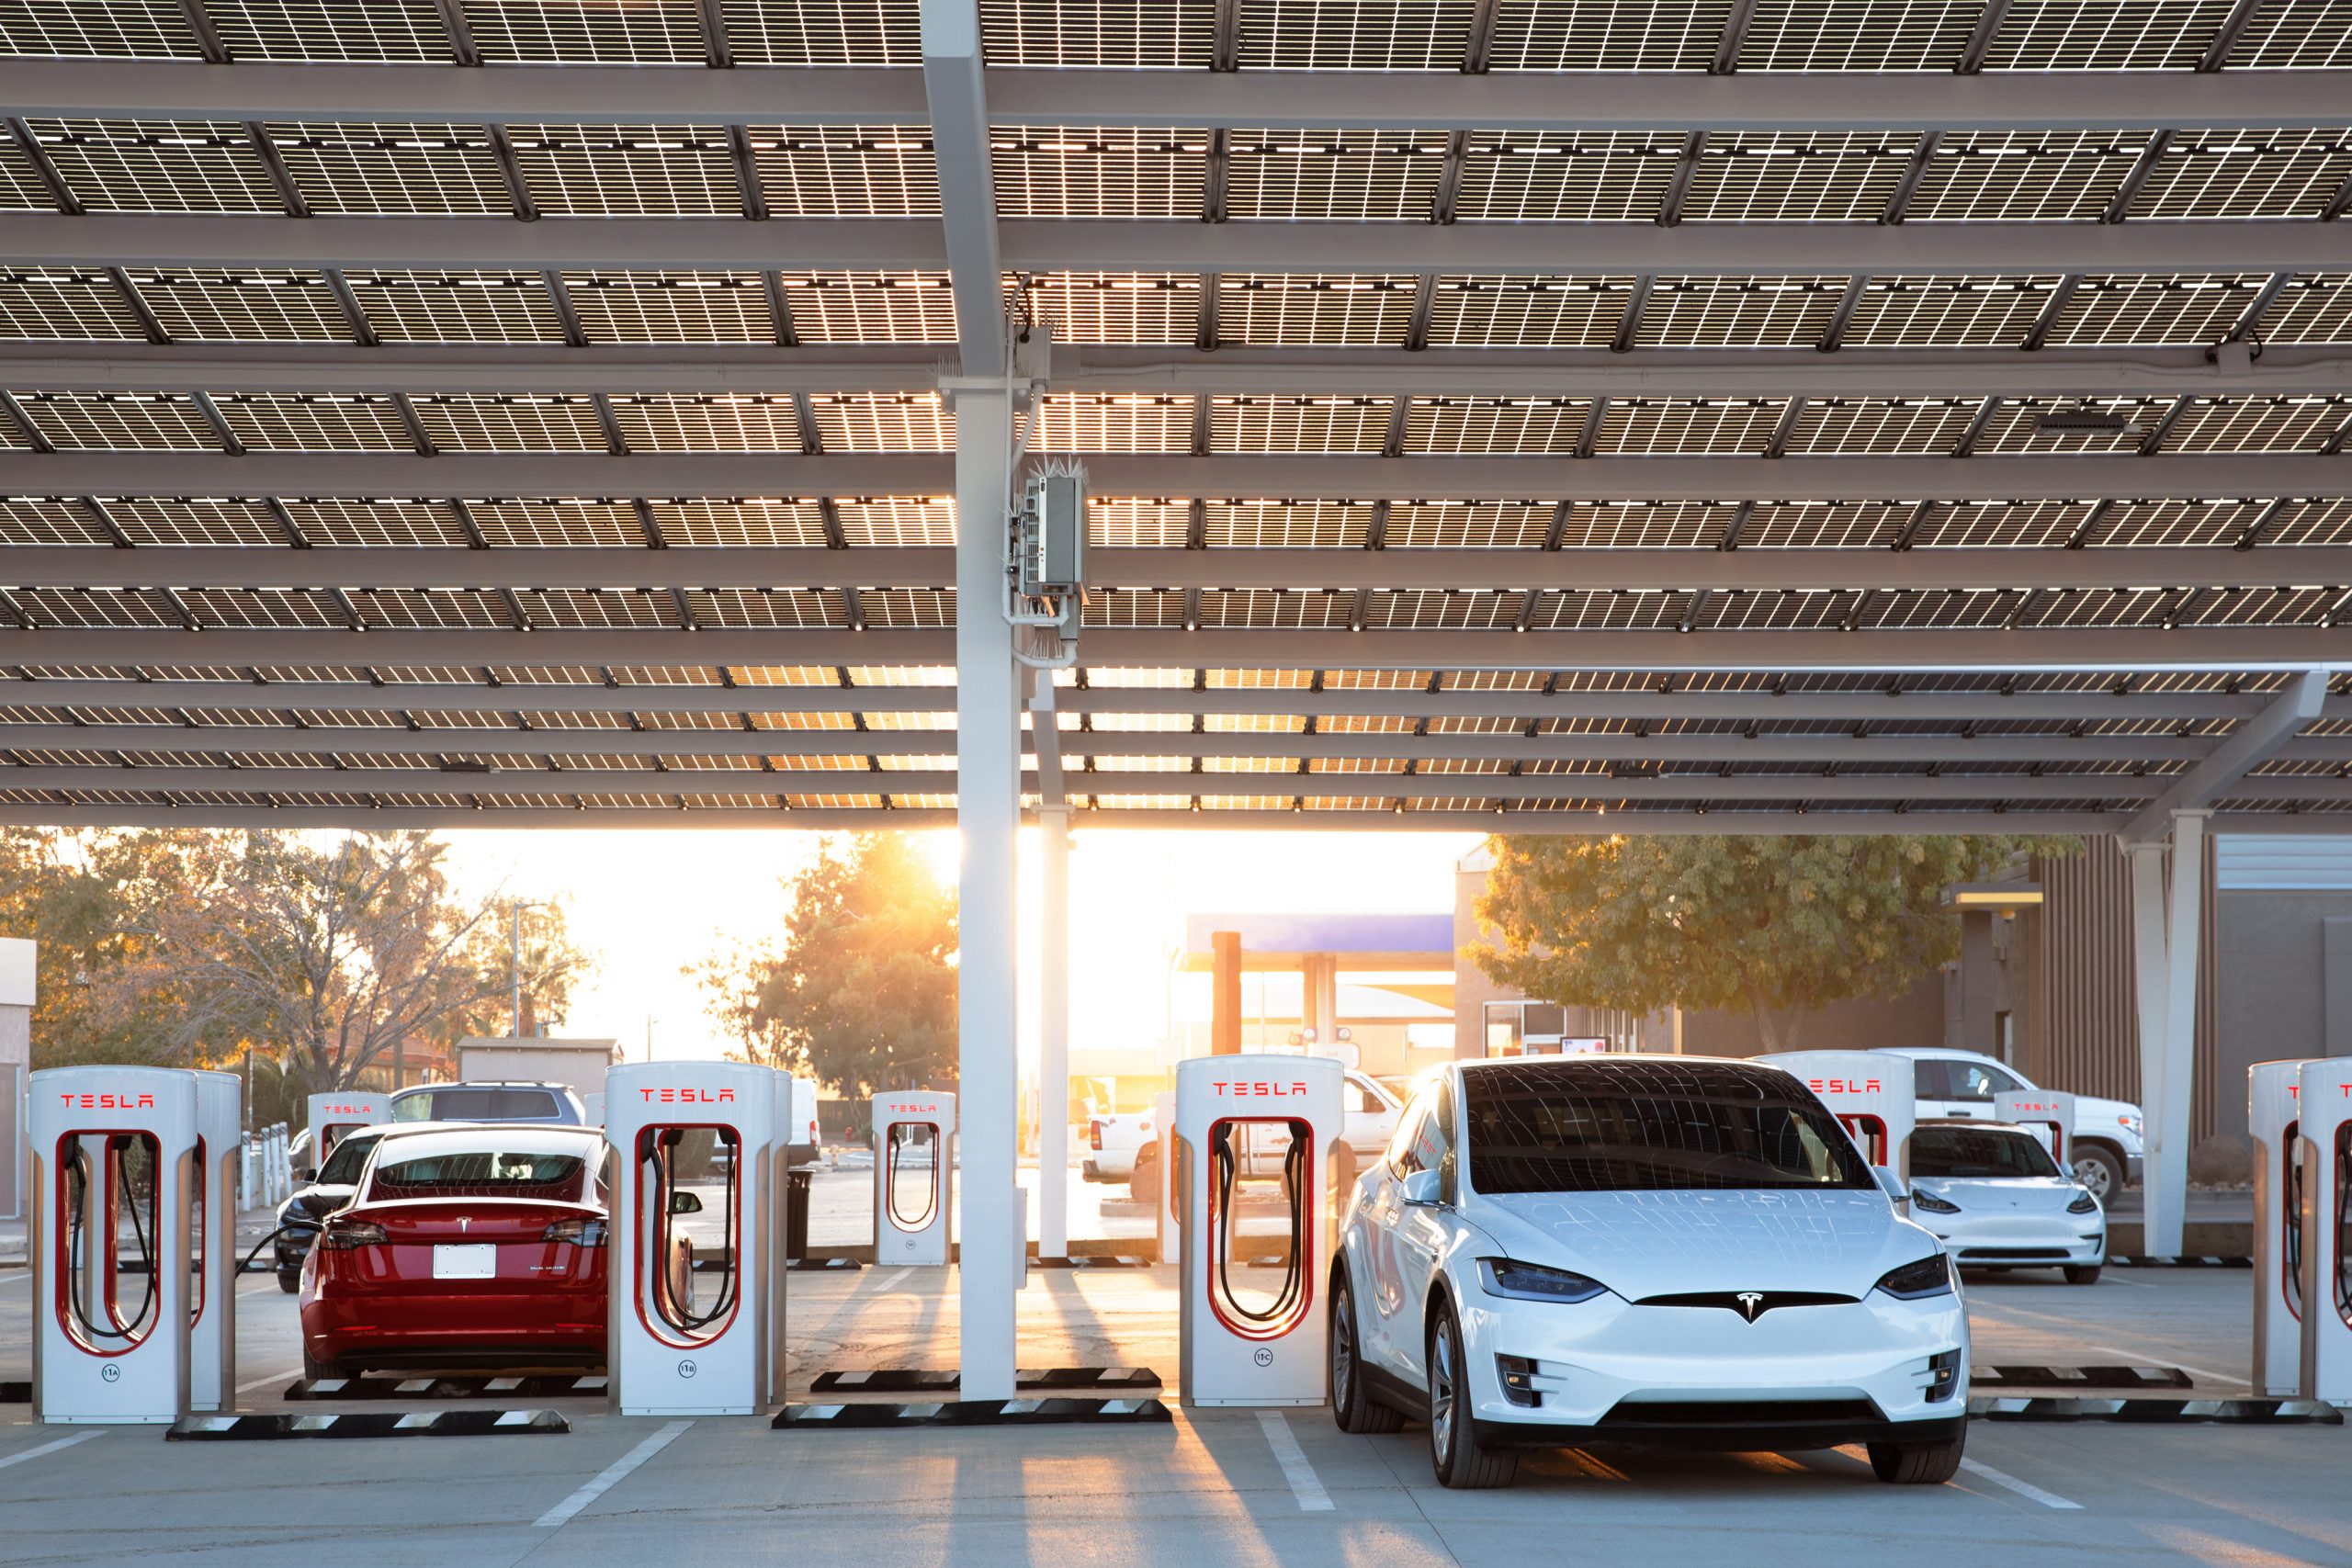 Major OEMs are teaming up to dethrone Tesla from charging dominance